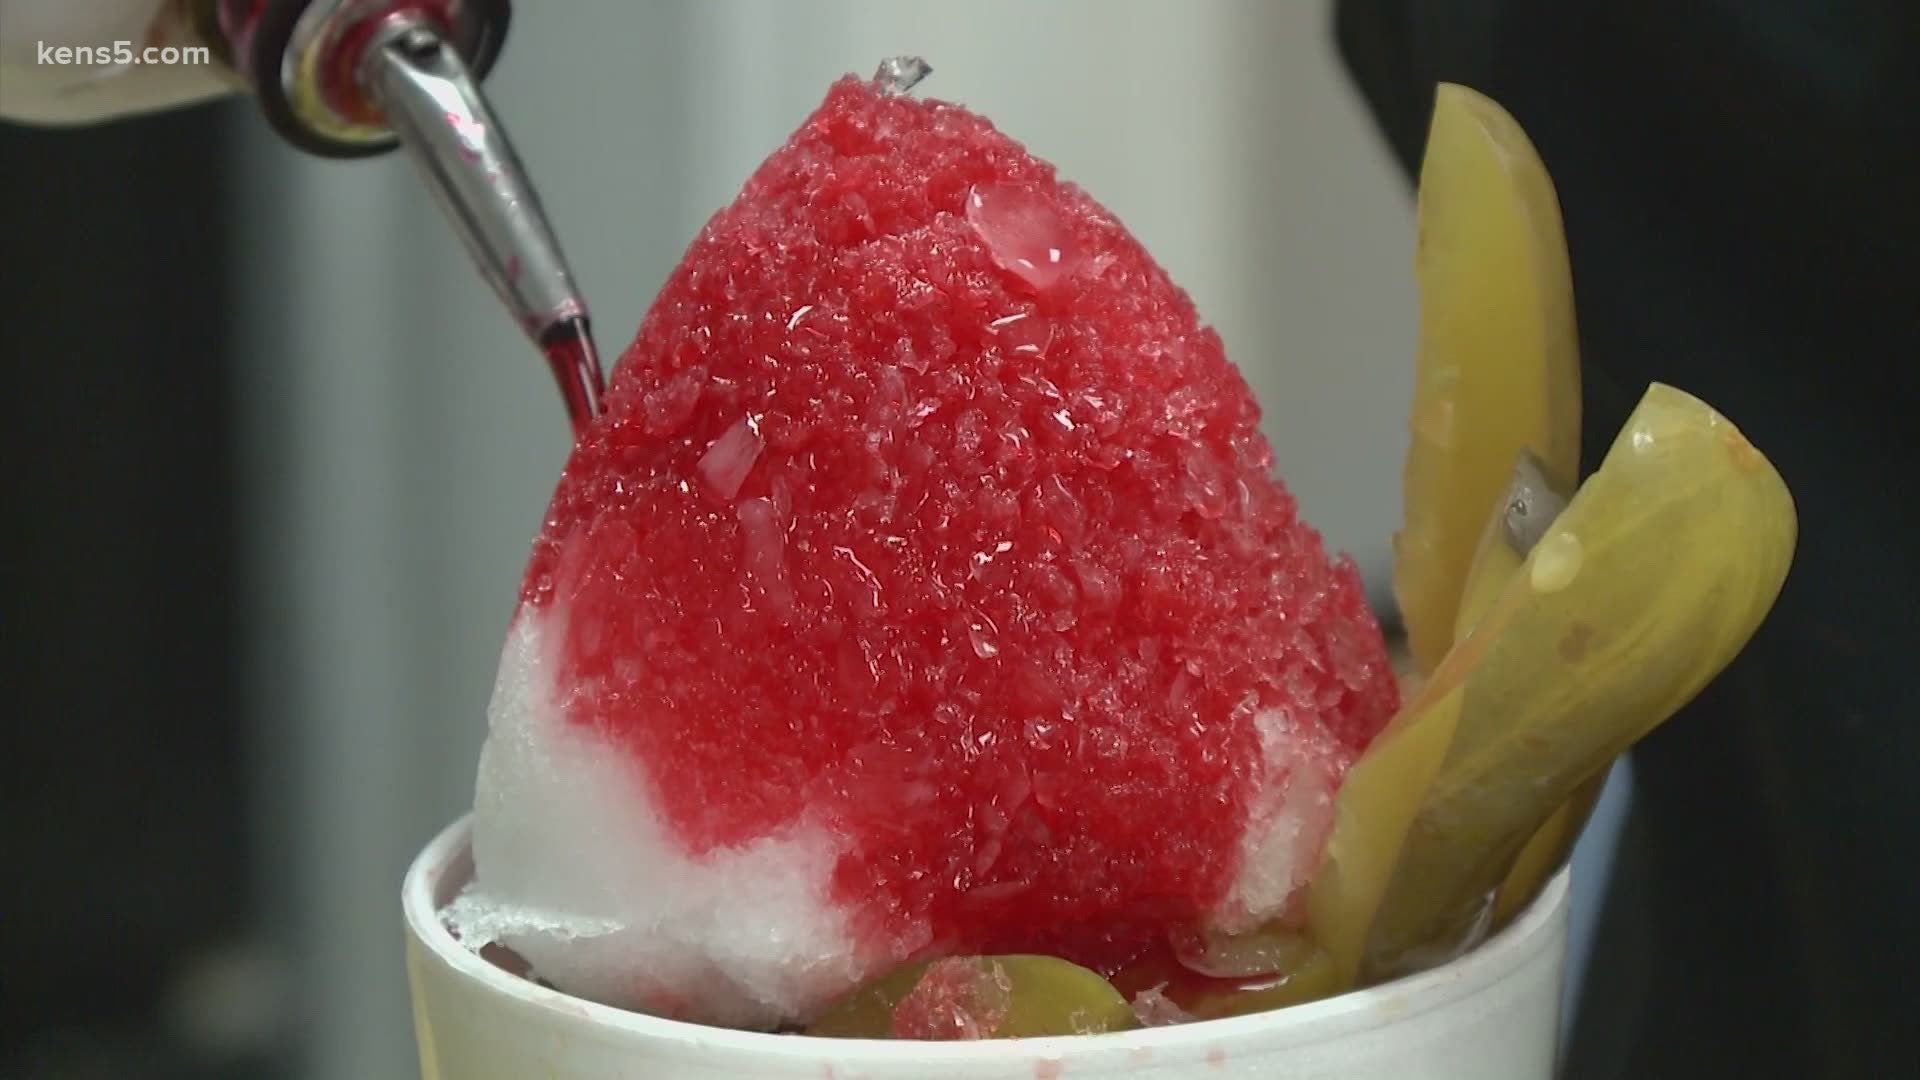 Chamoy City Limits Taking the traditional raspa to a whole new level